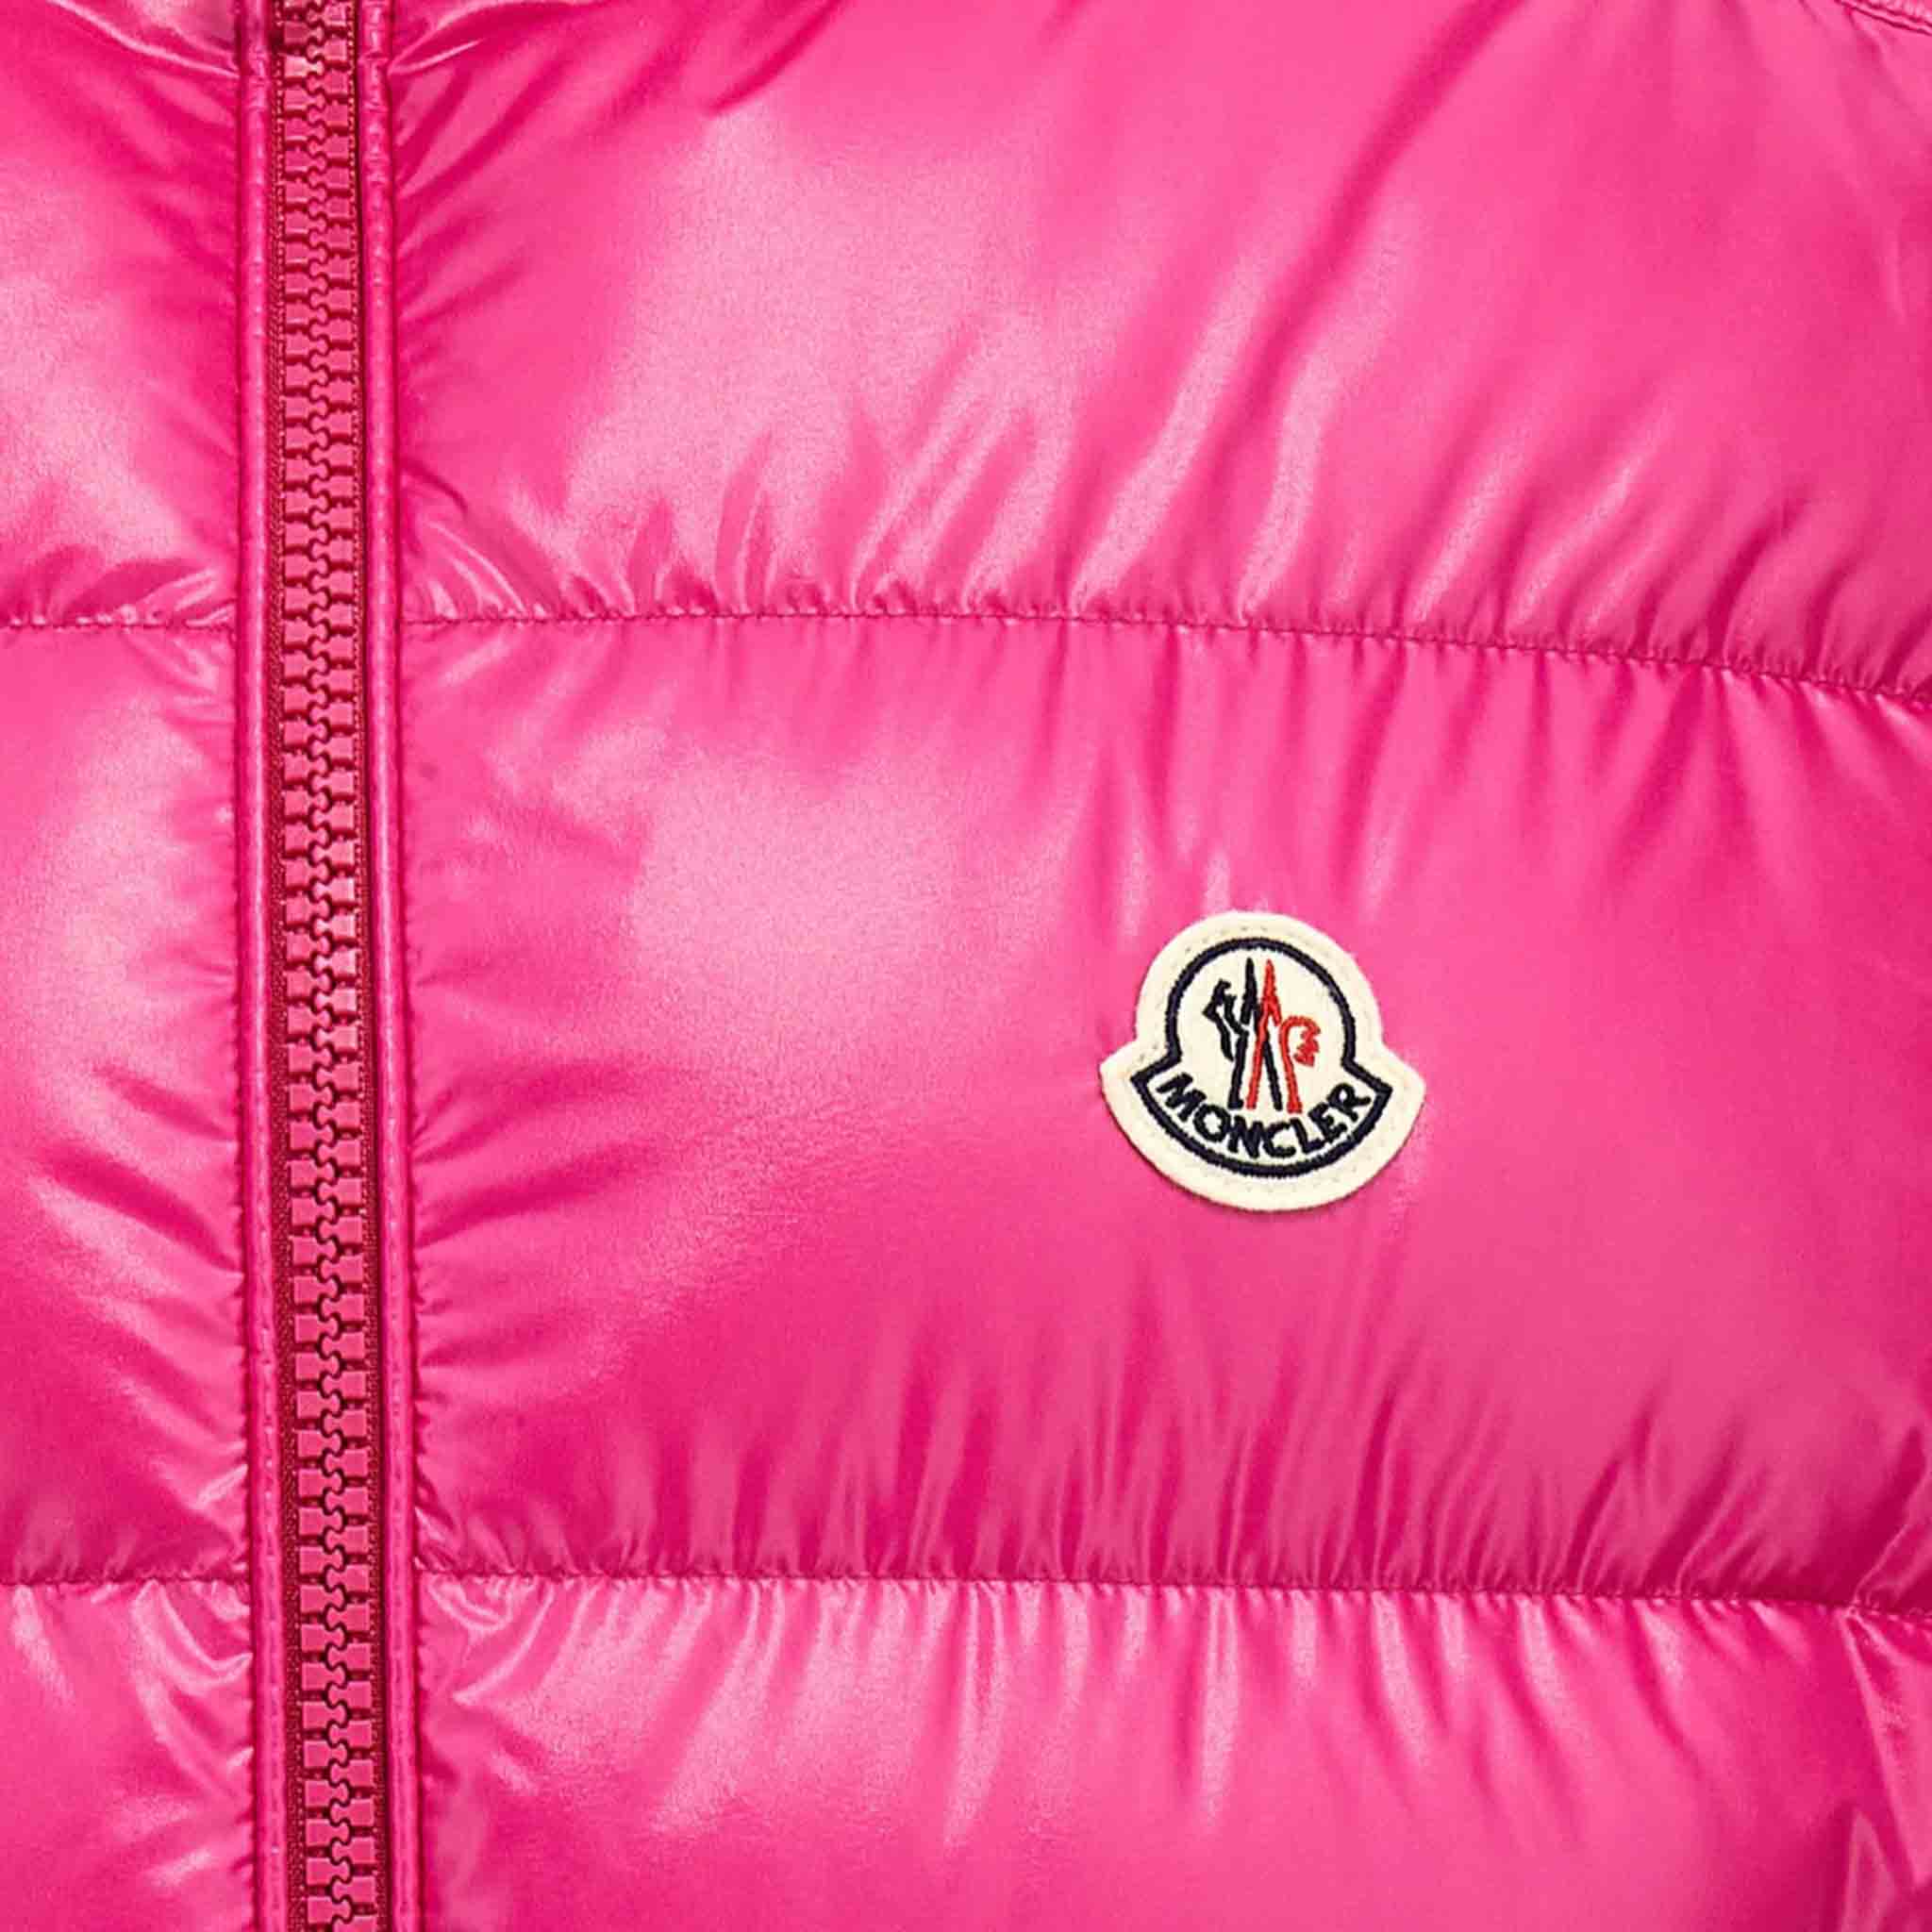 Moncler Womens Ouse Gilet in Pink